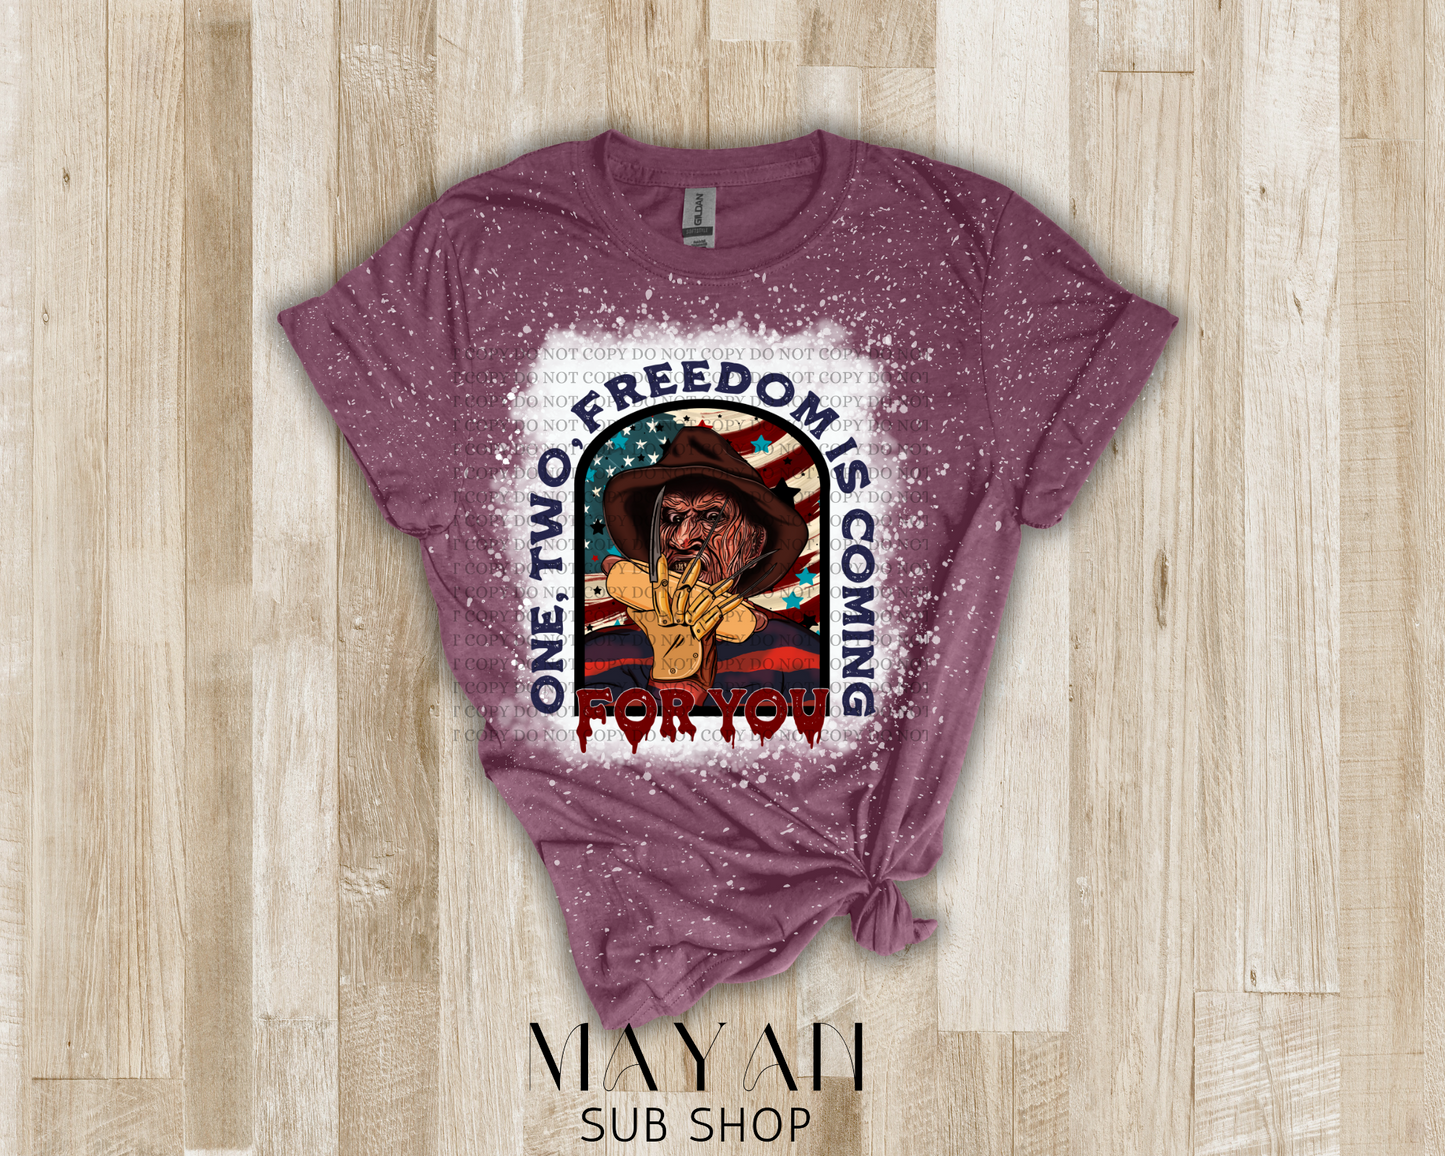 Freedom is coming bleached shirt - Mayan Sub Shop